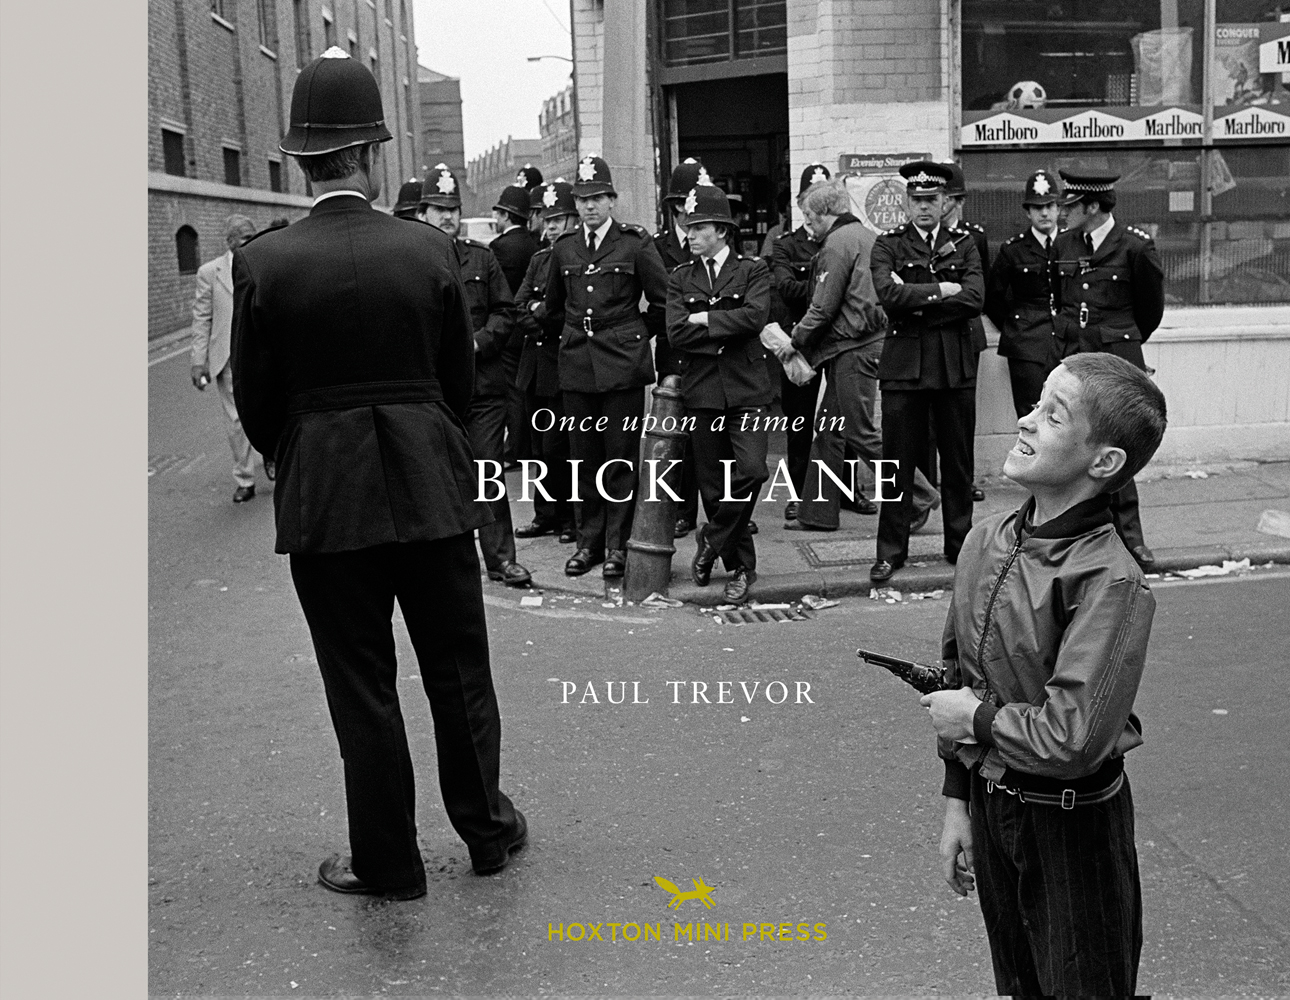 Line of policemen on street corner, young white child standing in front holding gun, pulling face, on landscape cover of 'Once Upon a Time in Brick Lane', by Hoxton Mini Press.